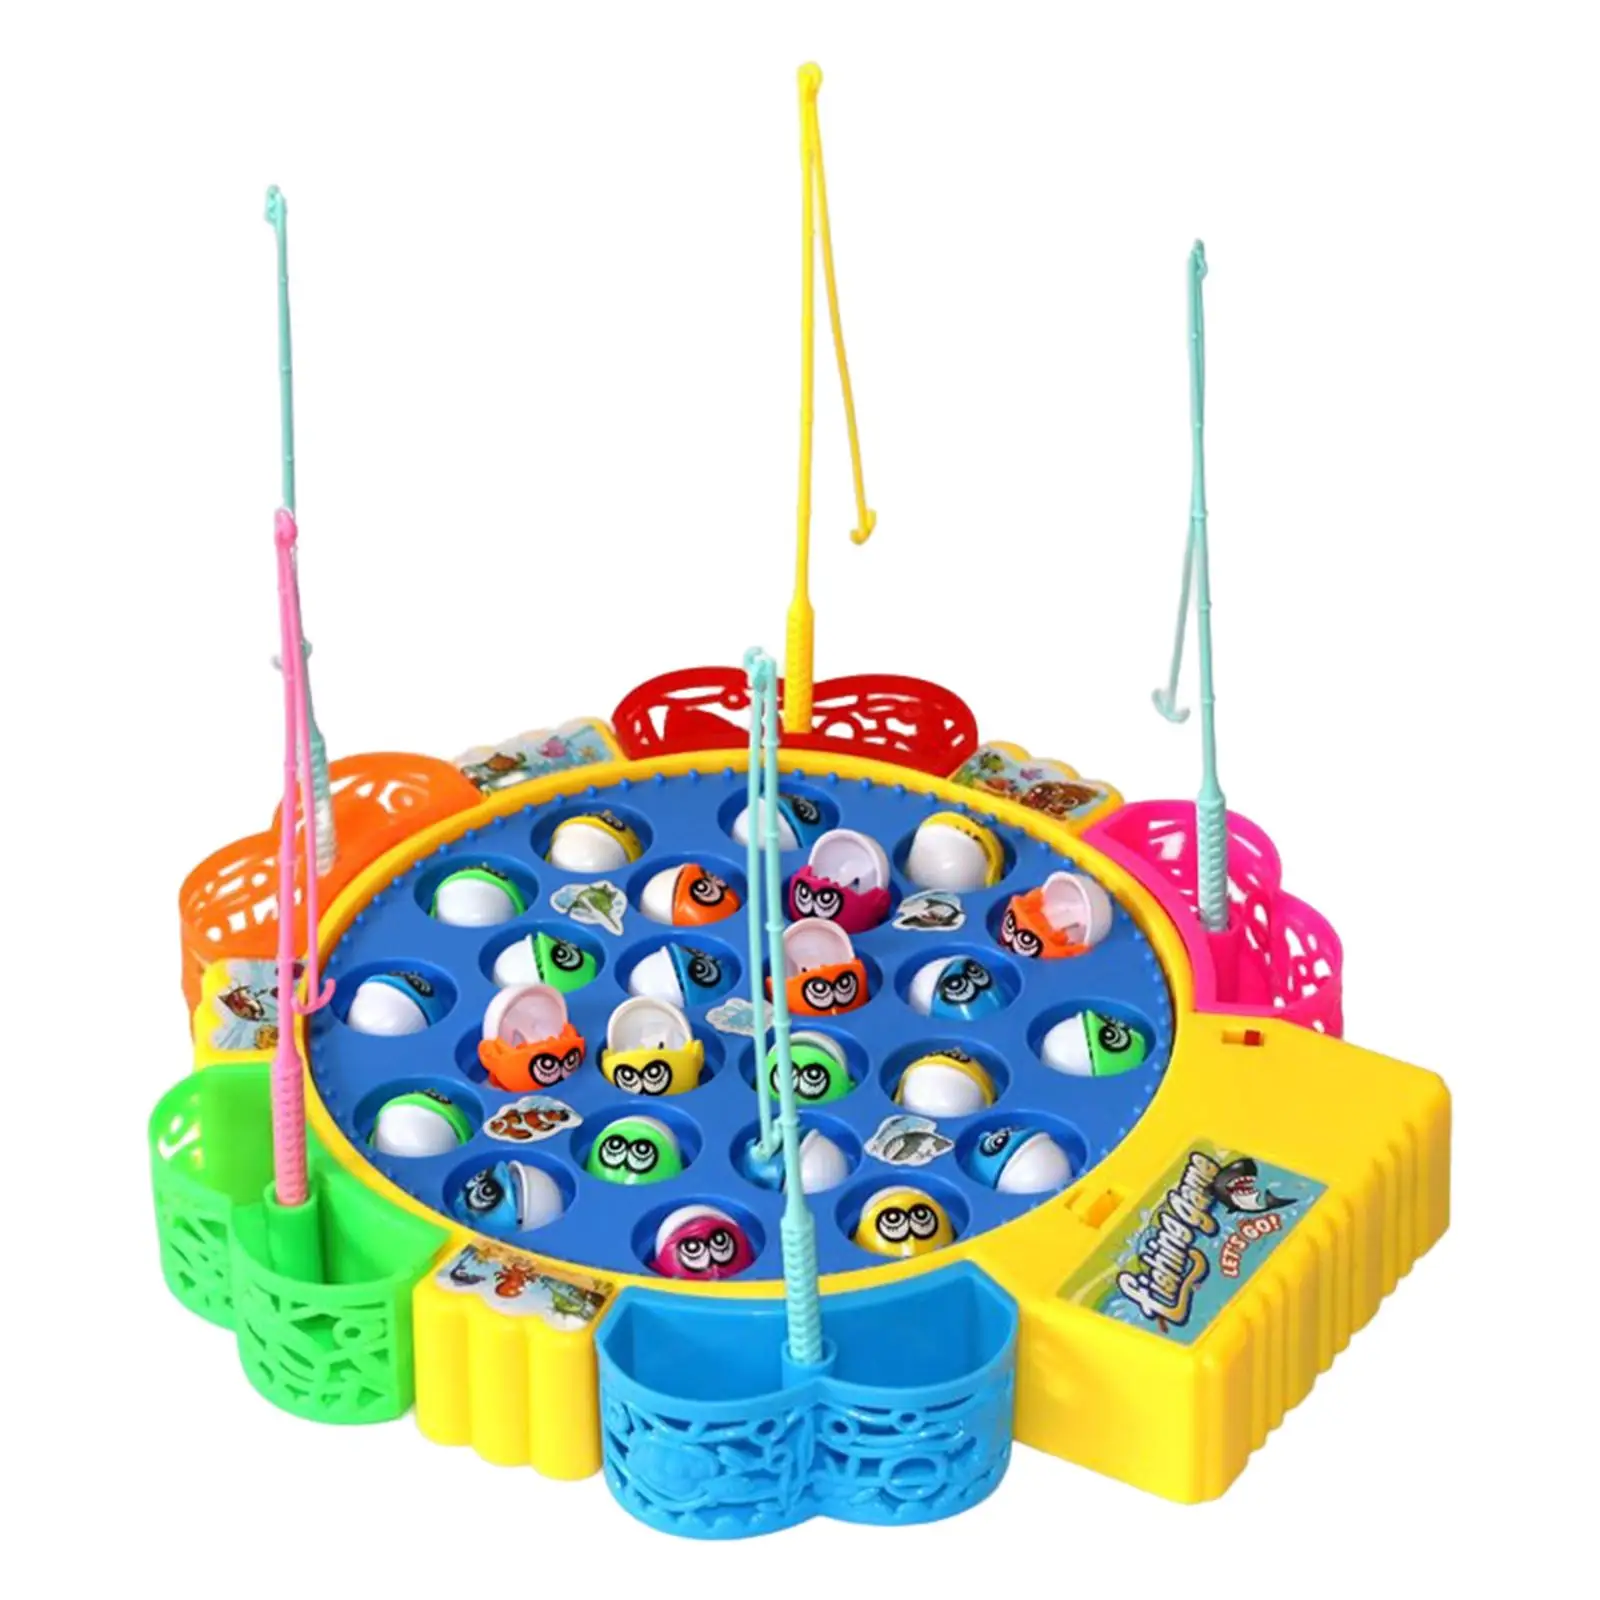 Montessori Rotating Fishing Game Kids toy, board Game for Ages 3+ Preschool